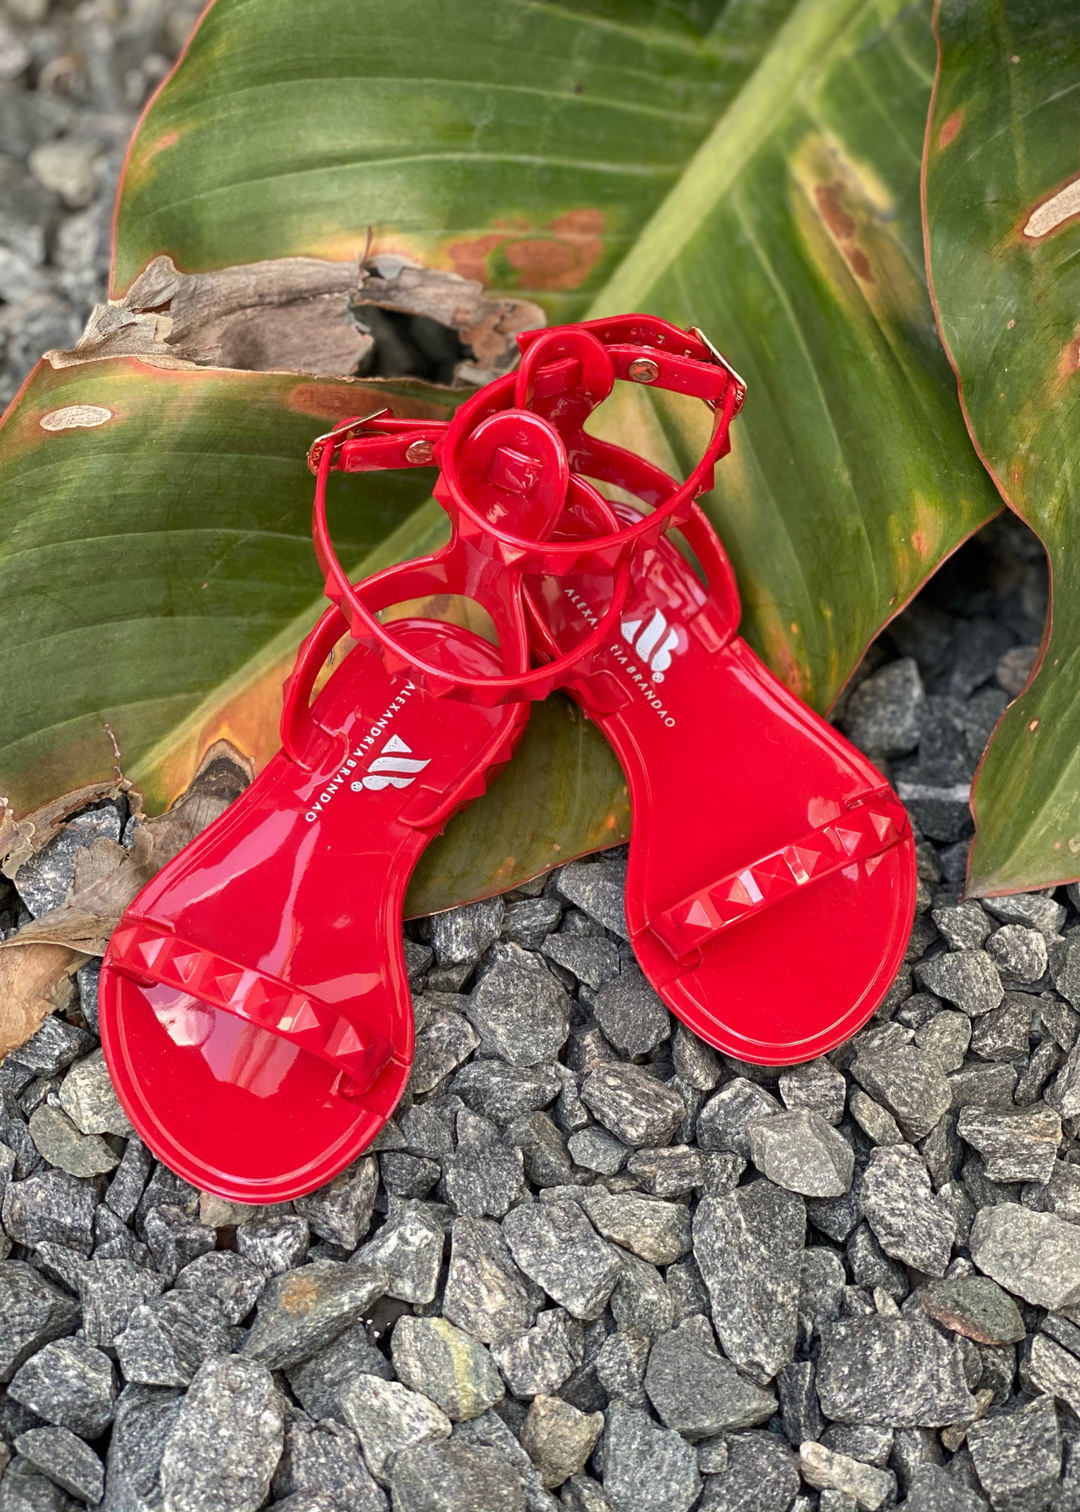 Aria Kids red jelly sandals with thin strap across the toes and thin ankle strap. Shoes for beach and pool days. Wear them all year long with a casual chic look